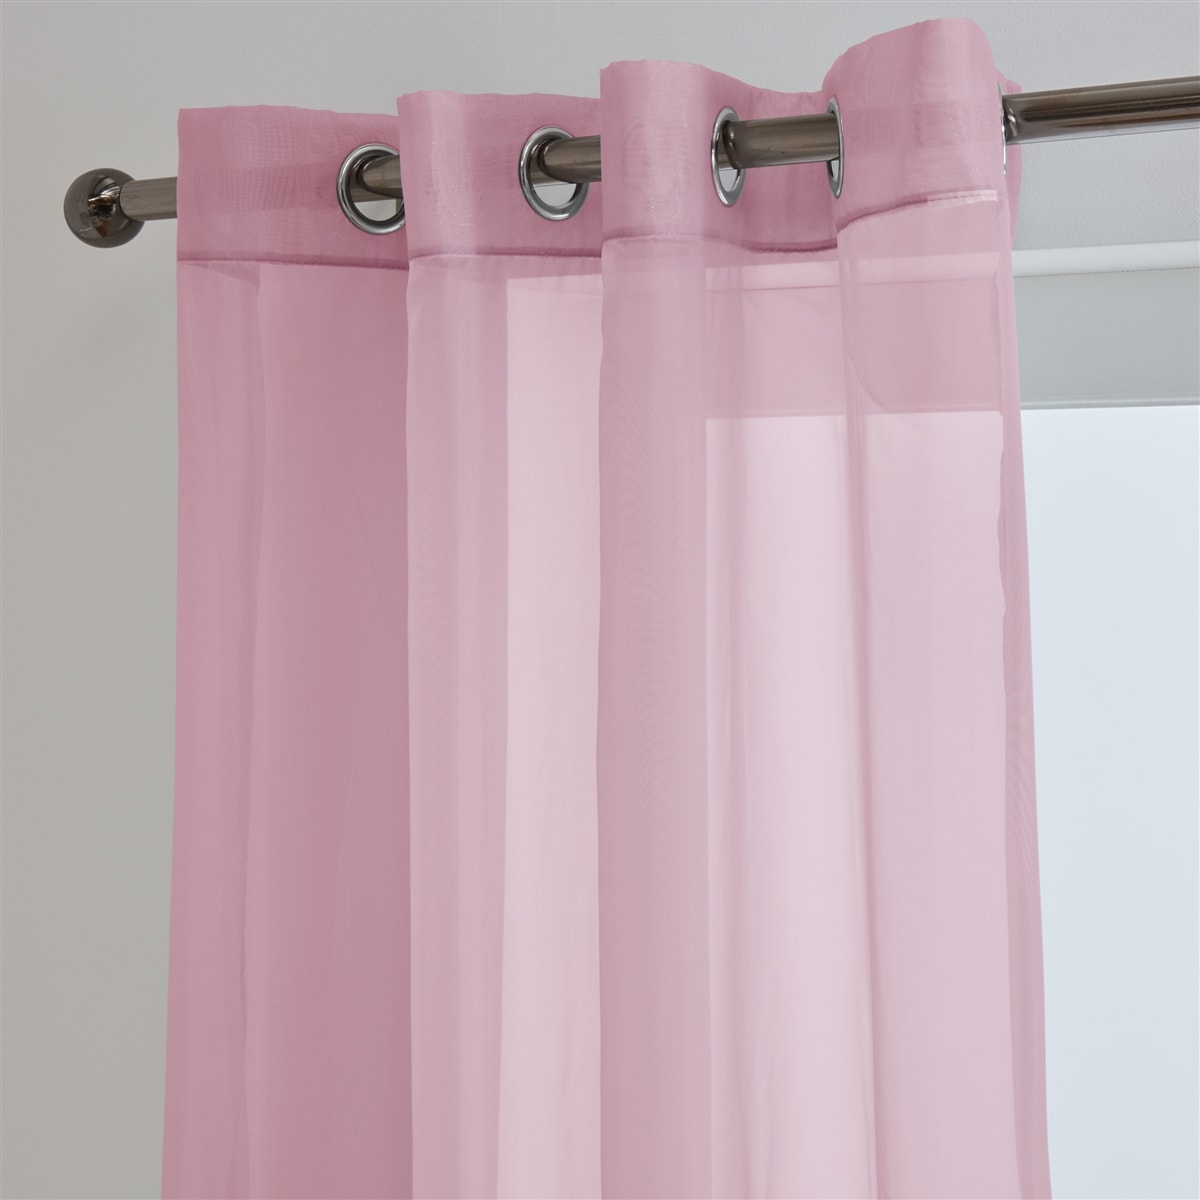 'Lucy' Pink Eyelet Ring Top Voile Panel